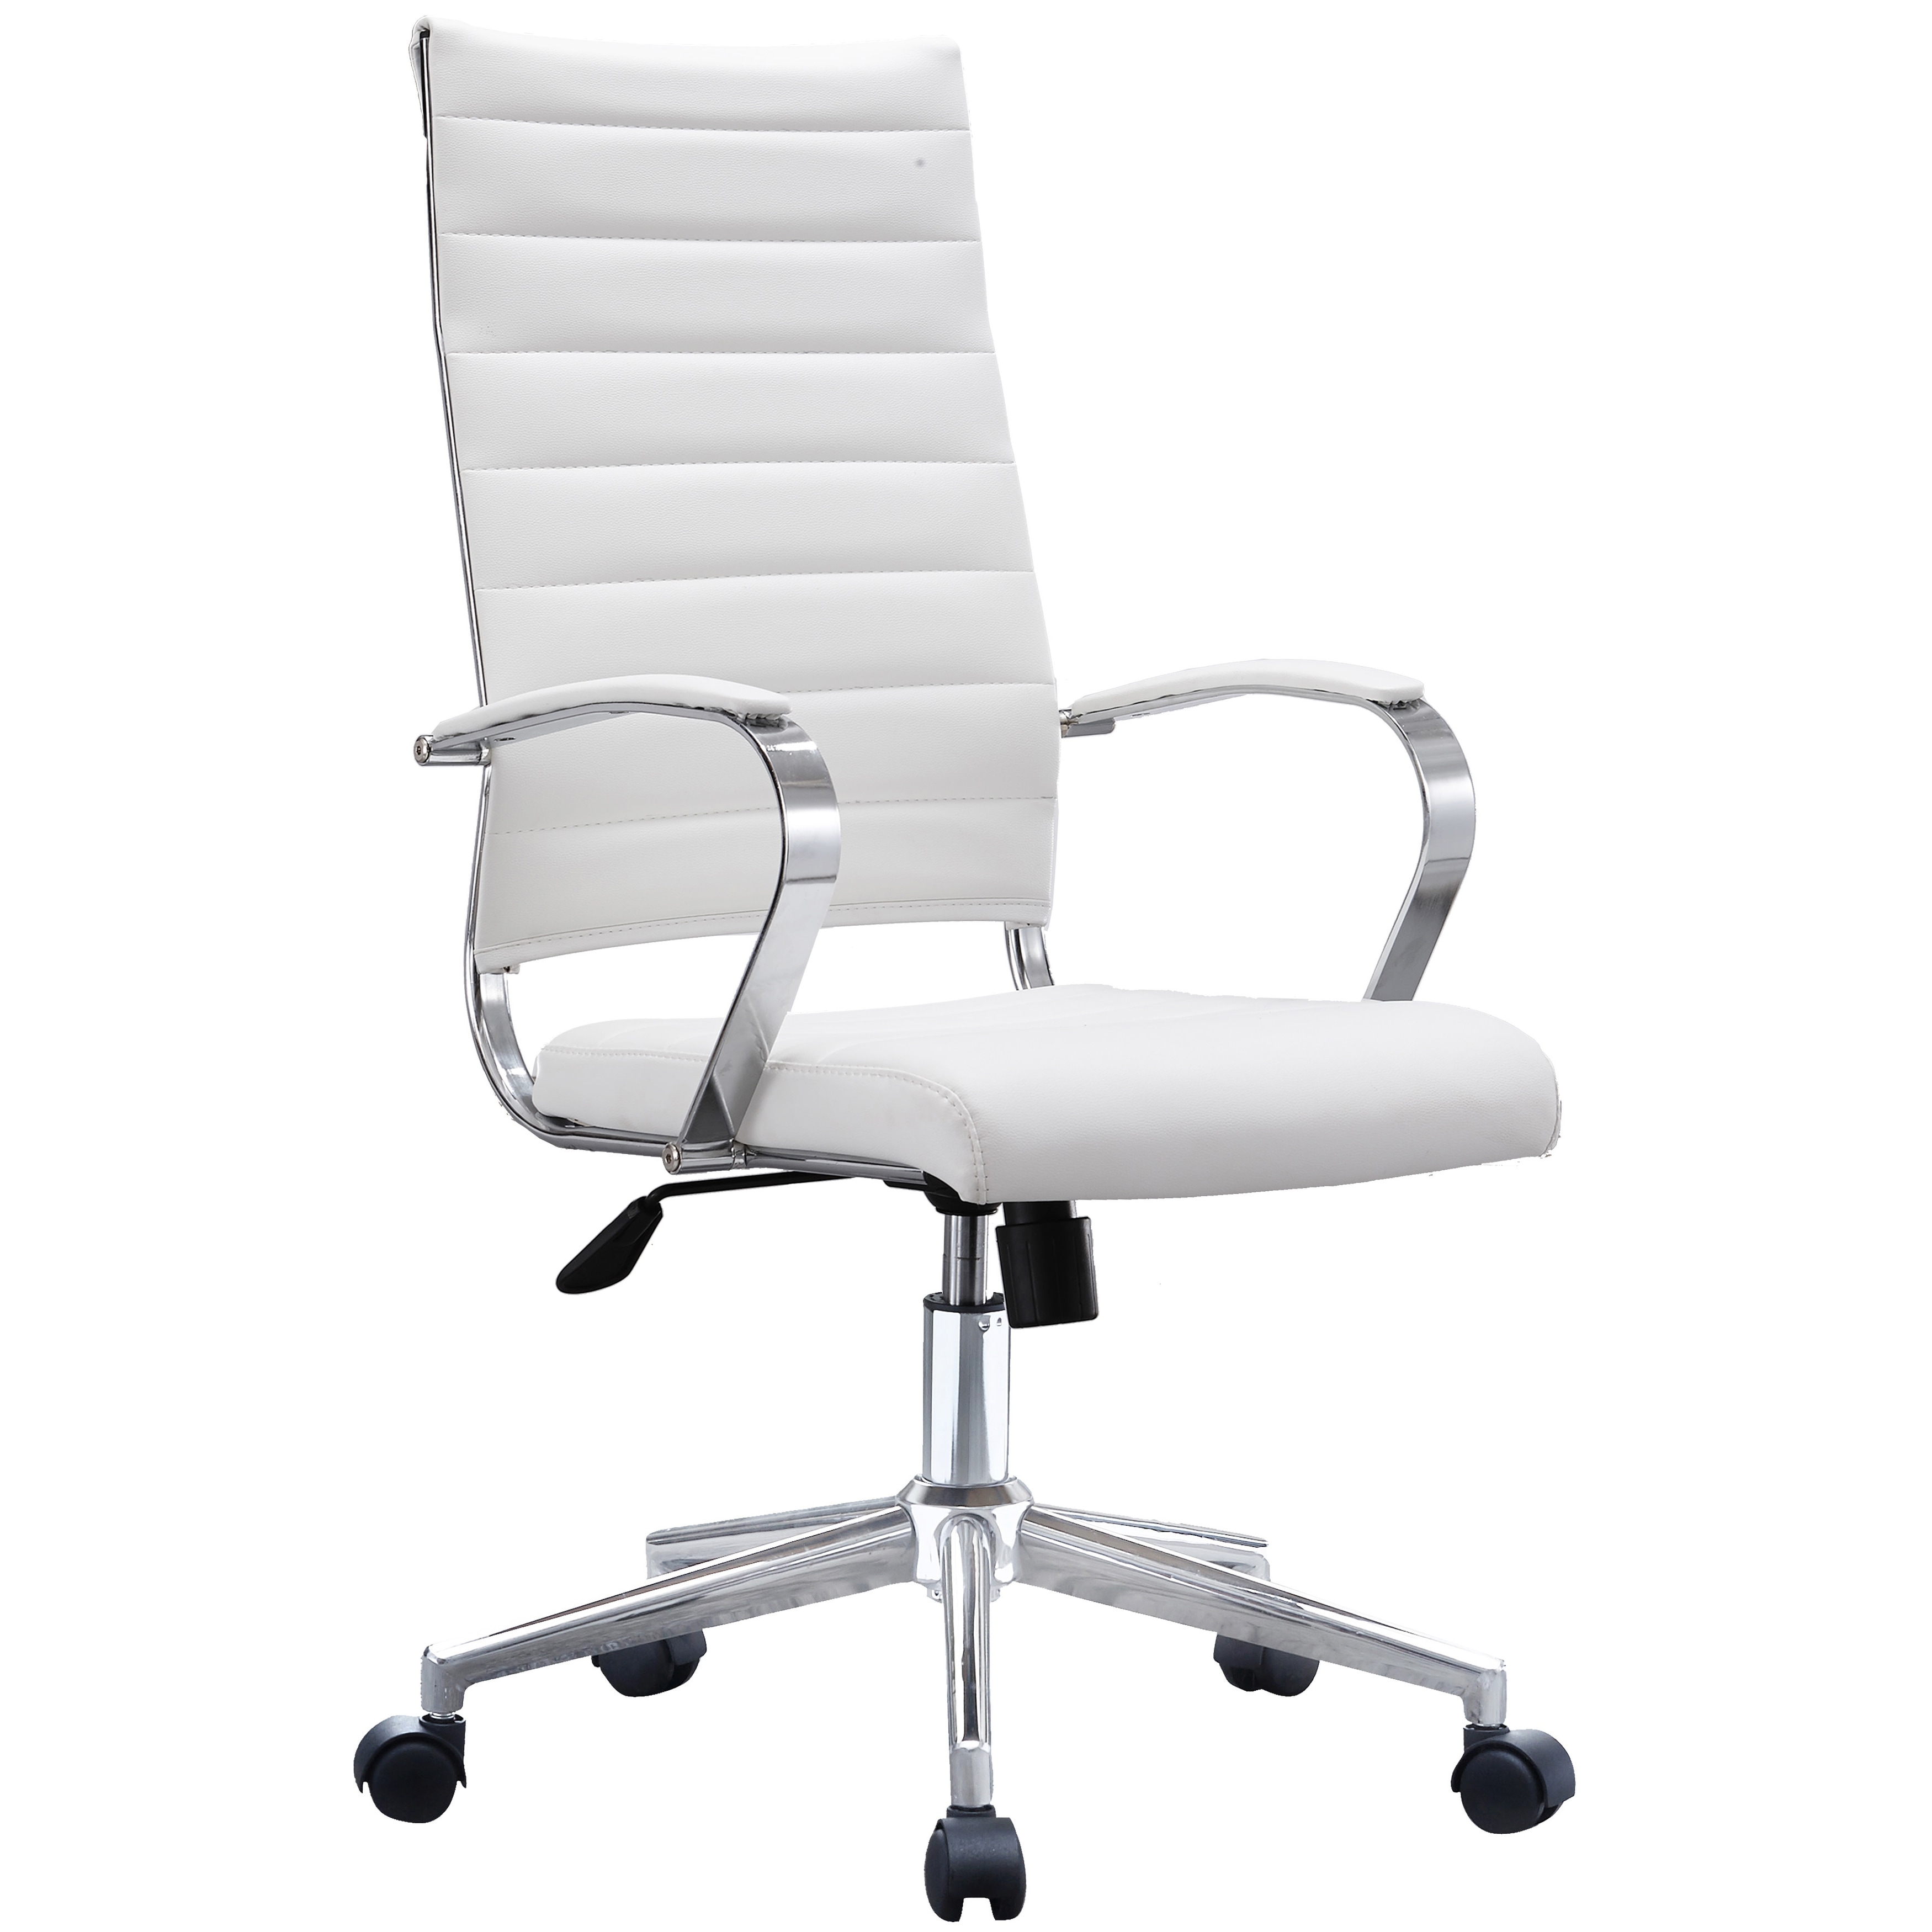 Shop 2xhome Modern White High Back Office Chair Ribbed Pu Leather Manager Tilt Conference Room Computer Desk Boss Task Executive Boss Overstock 15077823